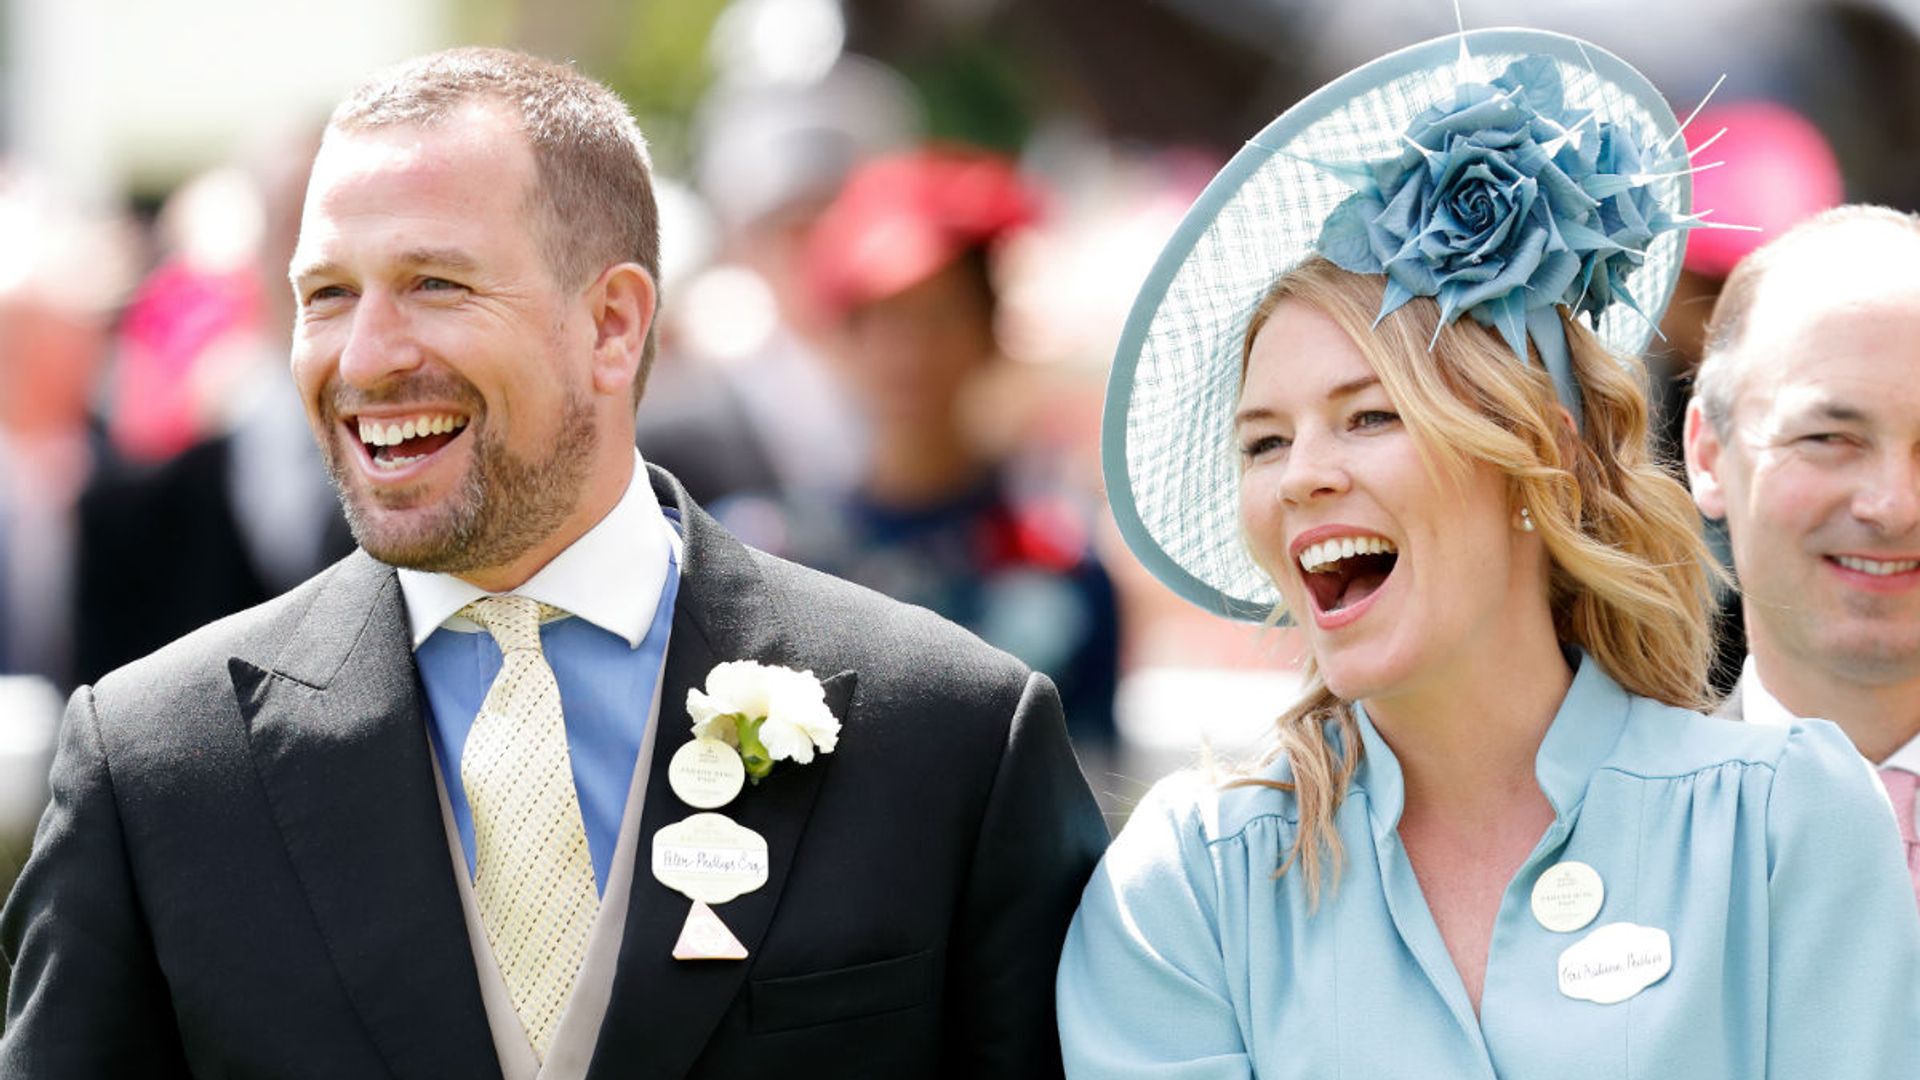 Peter and Autumn Phillips have fun taking selfies at Royal Ascot